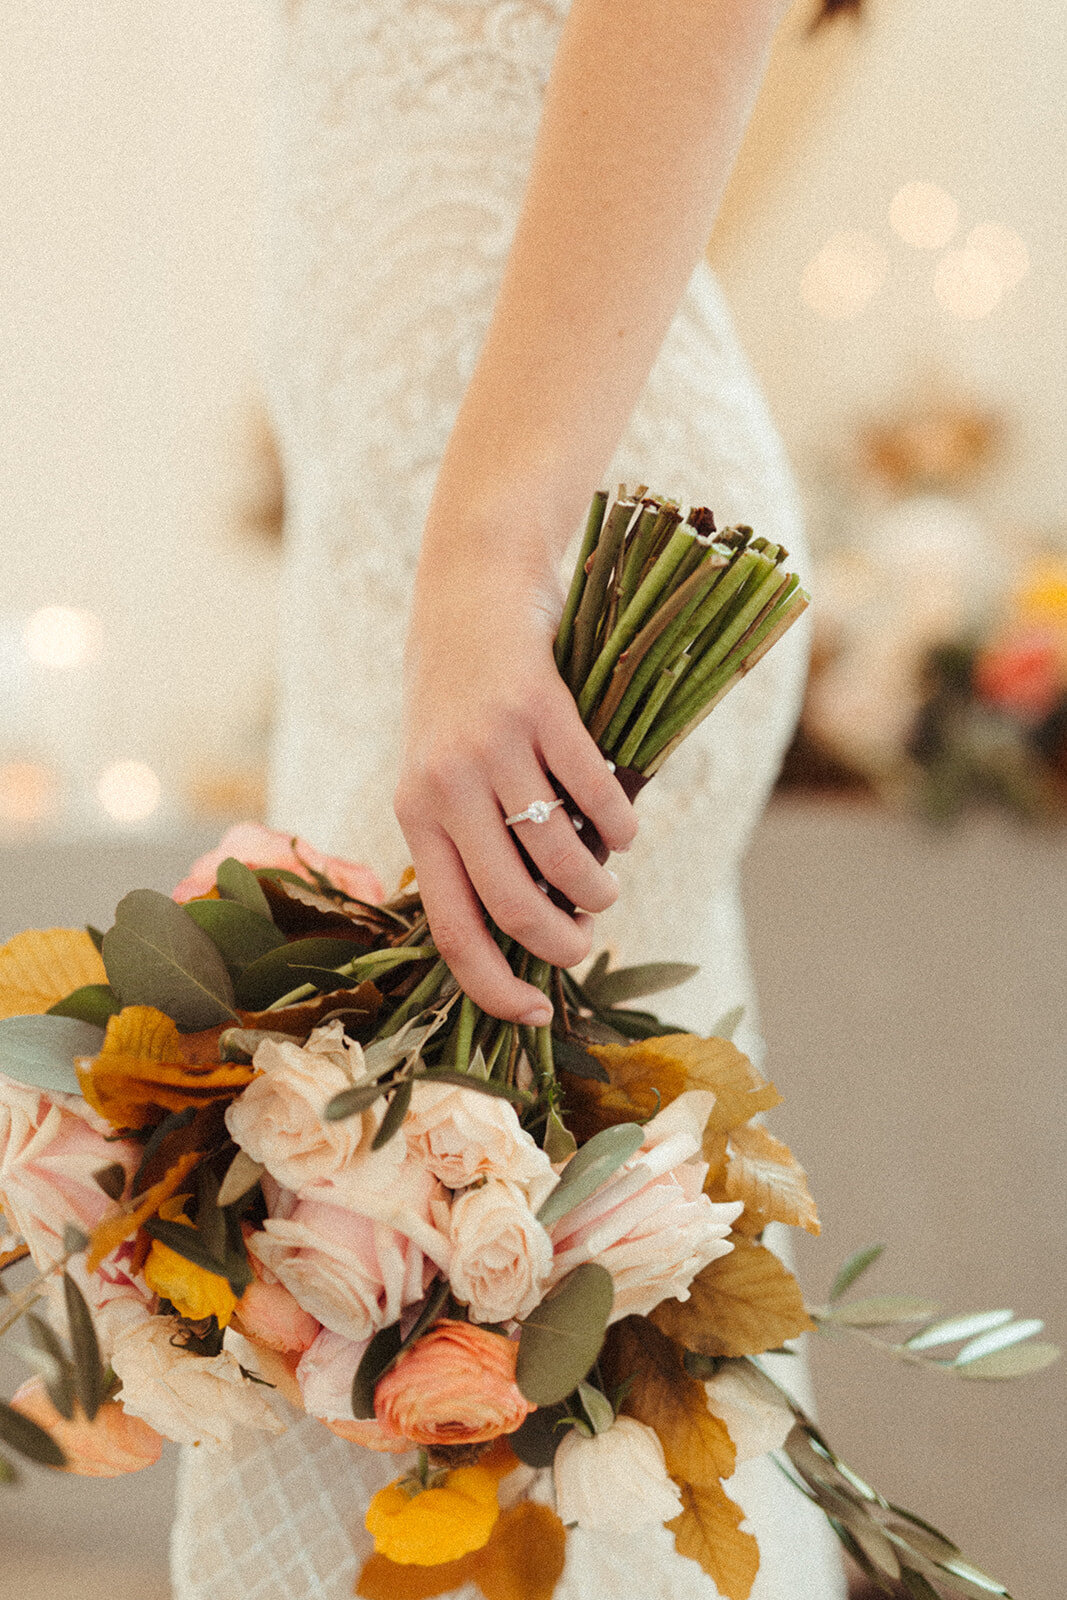 Close-up of the bride holding a bouquet of flowers against her white wedding gown.